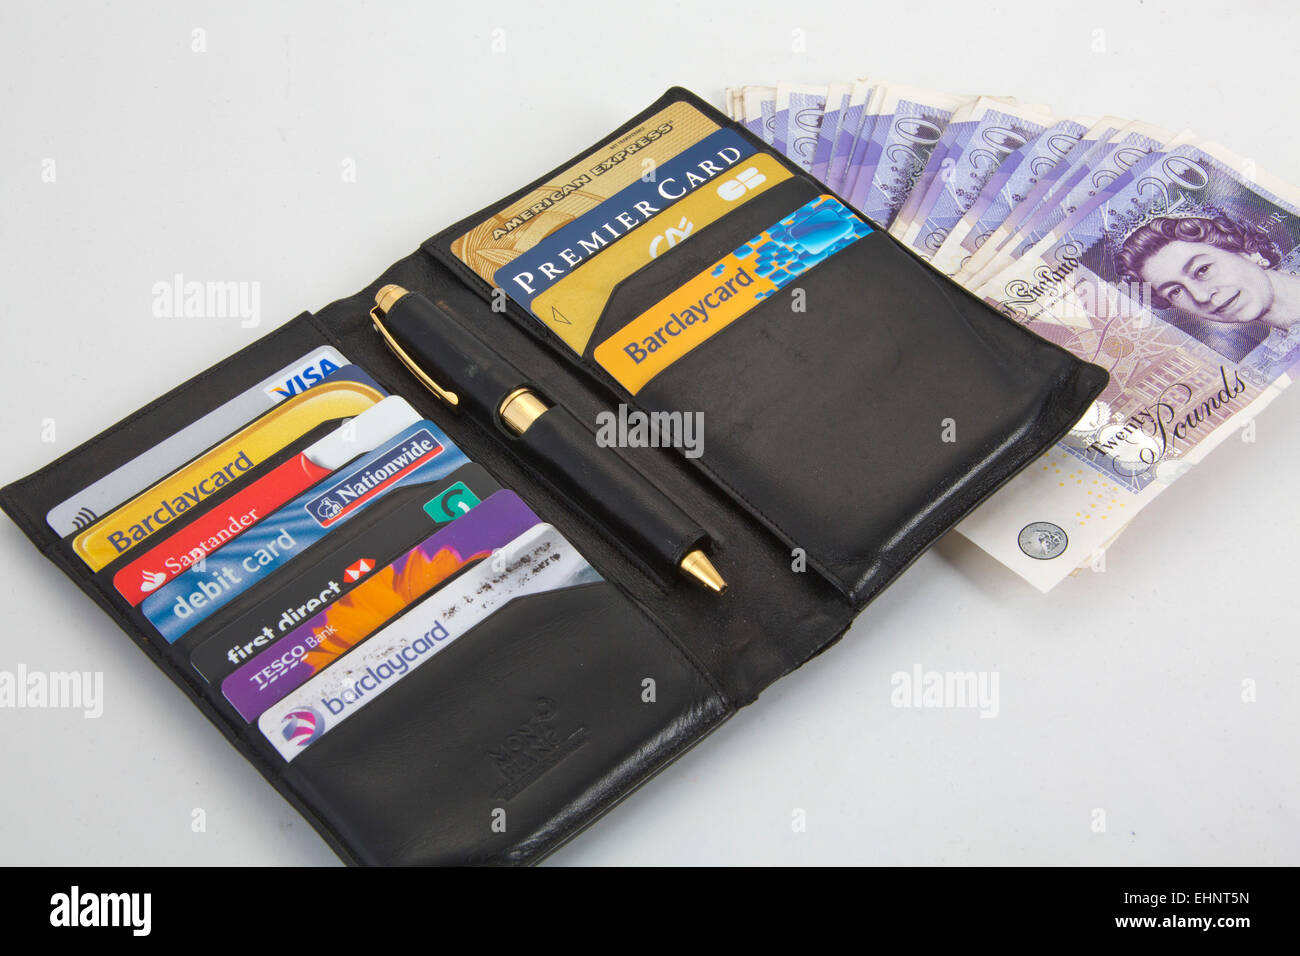 Black wallet with Assortment of credit cards Visa and American express 151141 Credit Cards Stock Photo